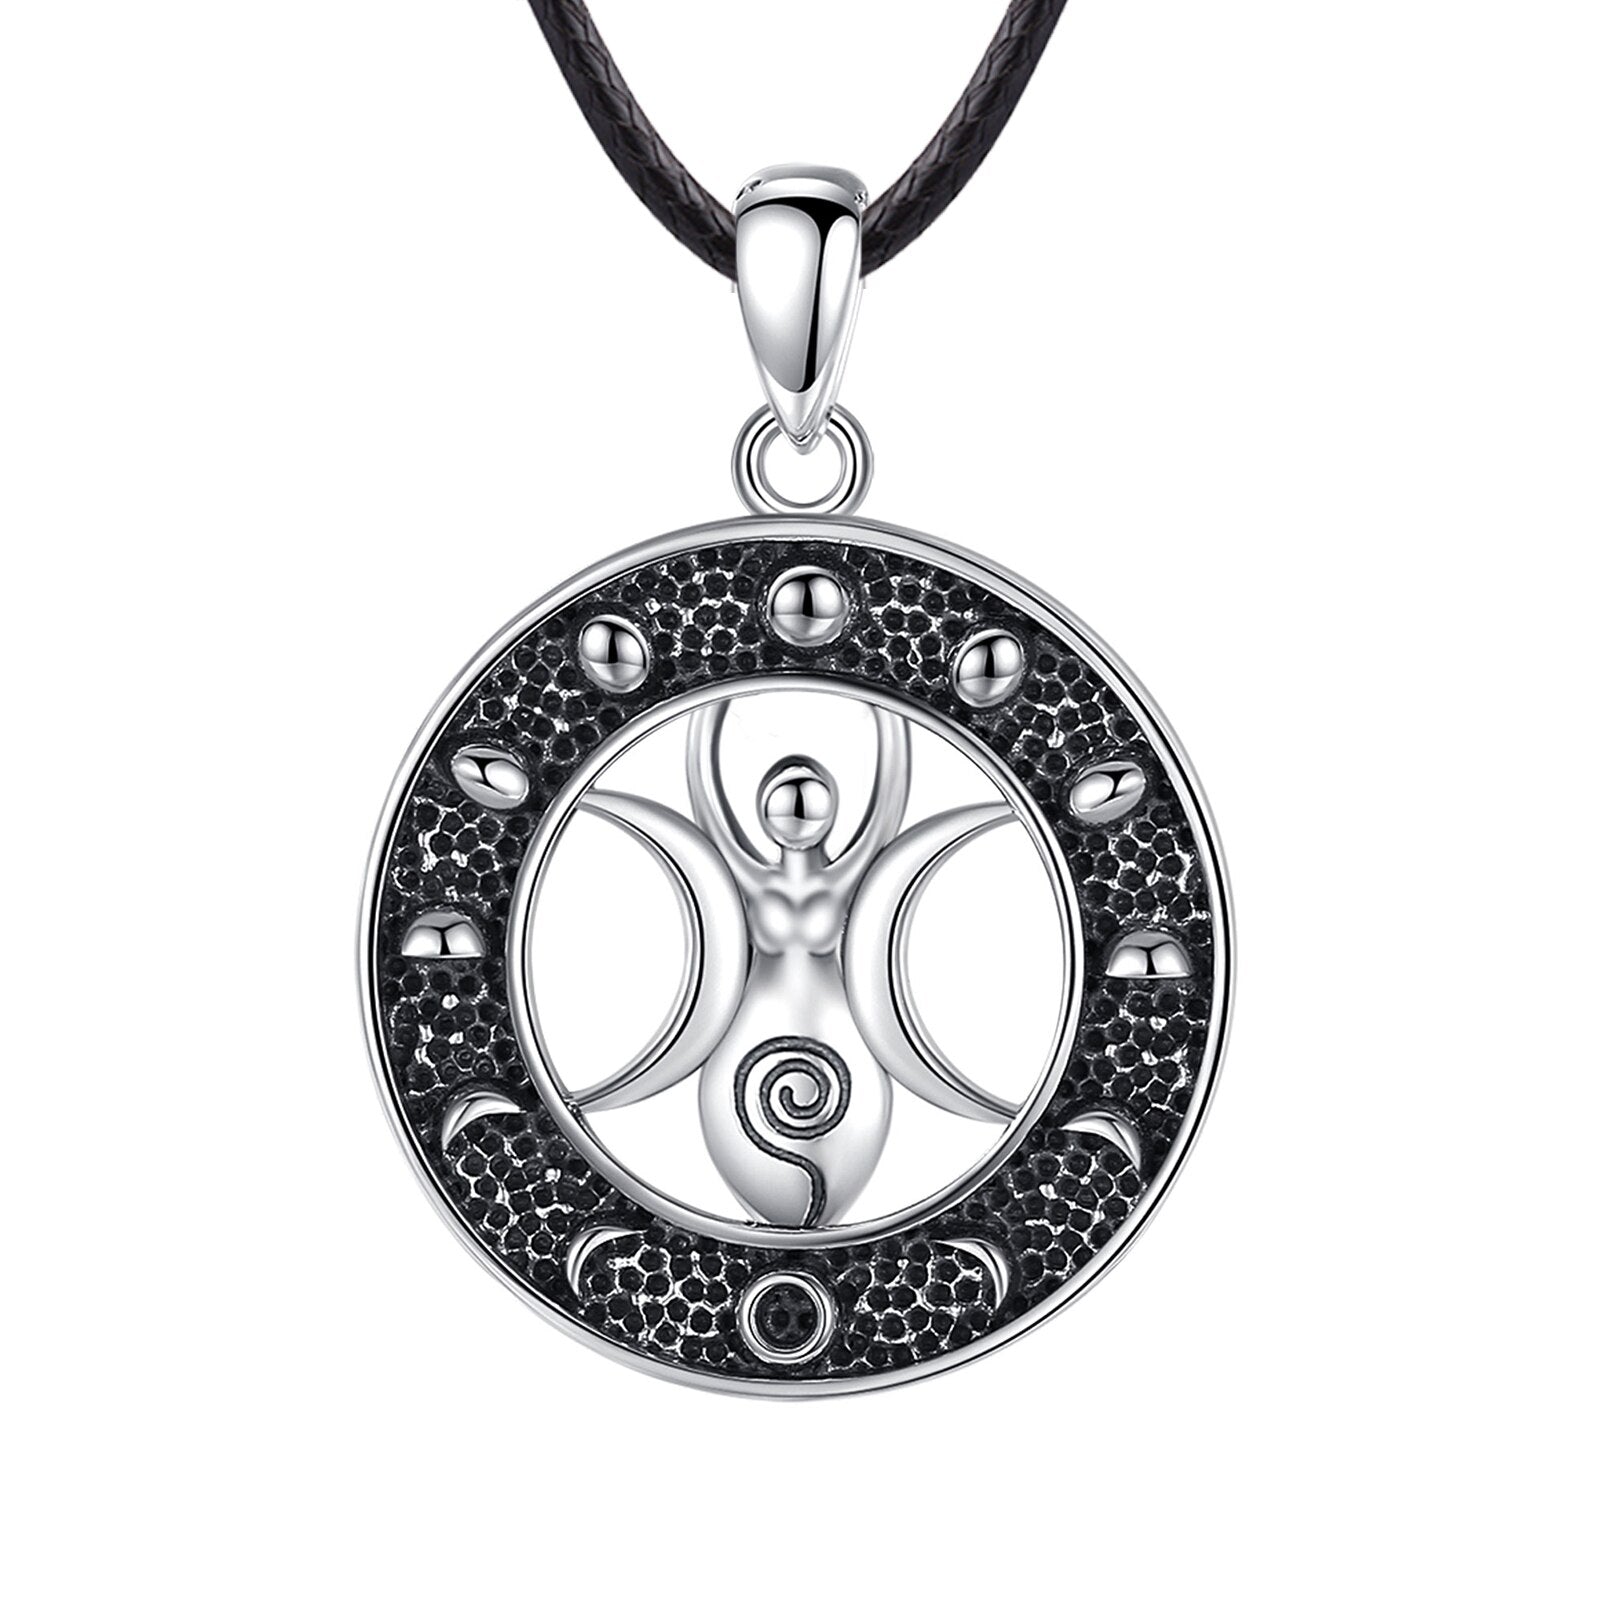 Triple Moon Goddess Necklace Lunar Cycle Moon Phase Necklace-MoonChildWorld